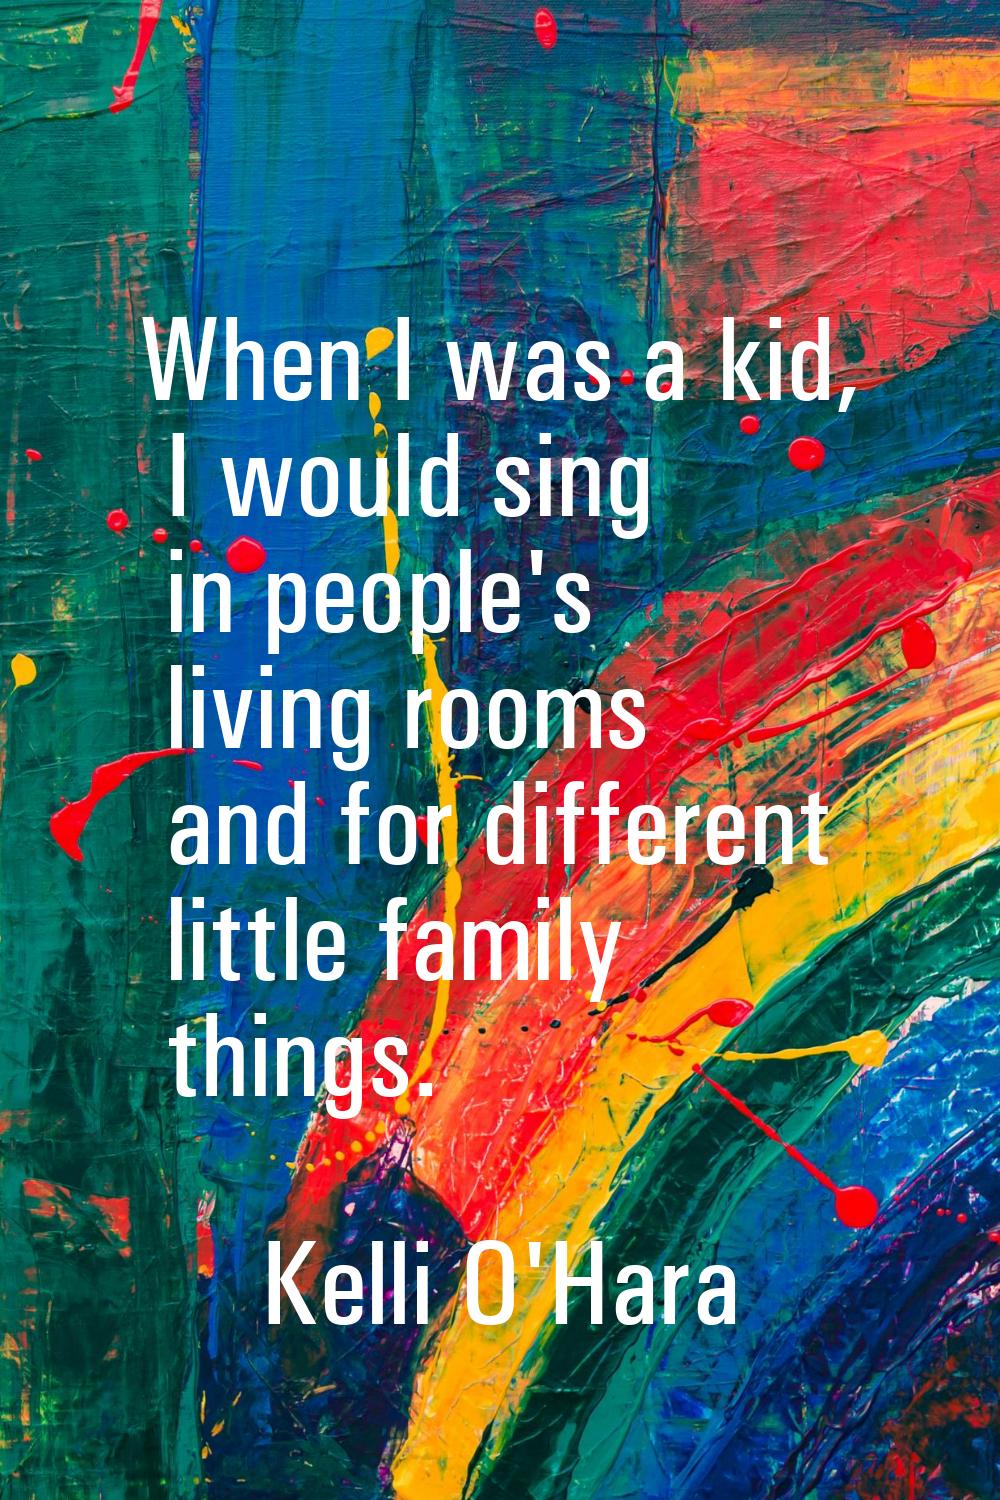 When I was a kid, I would sing in people's living rooms and for different little family things.